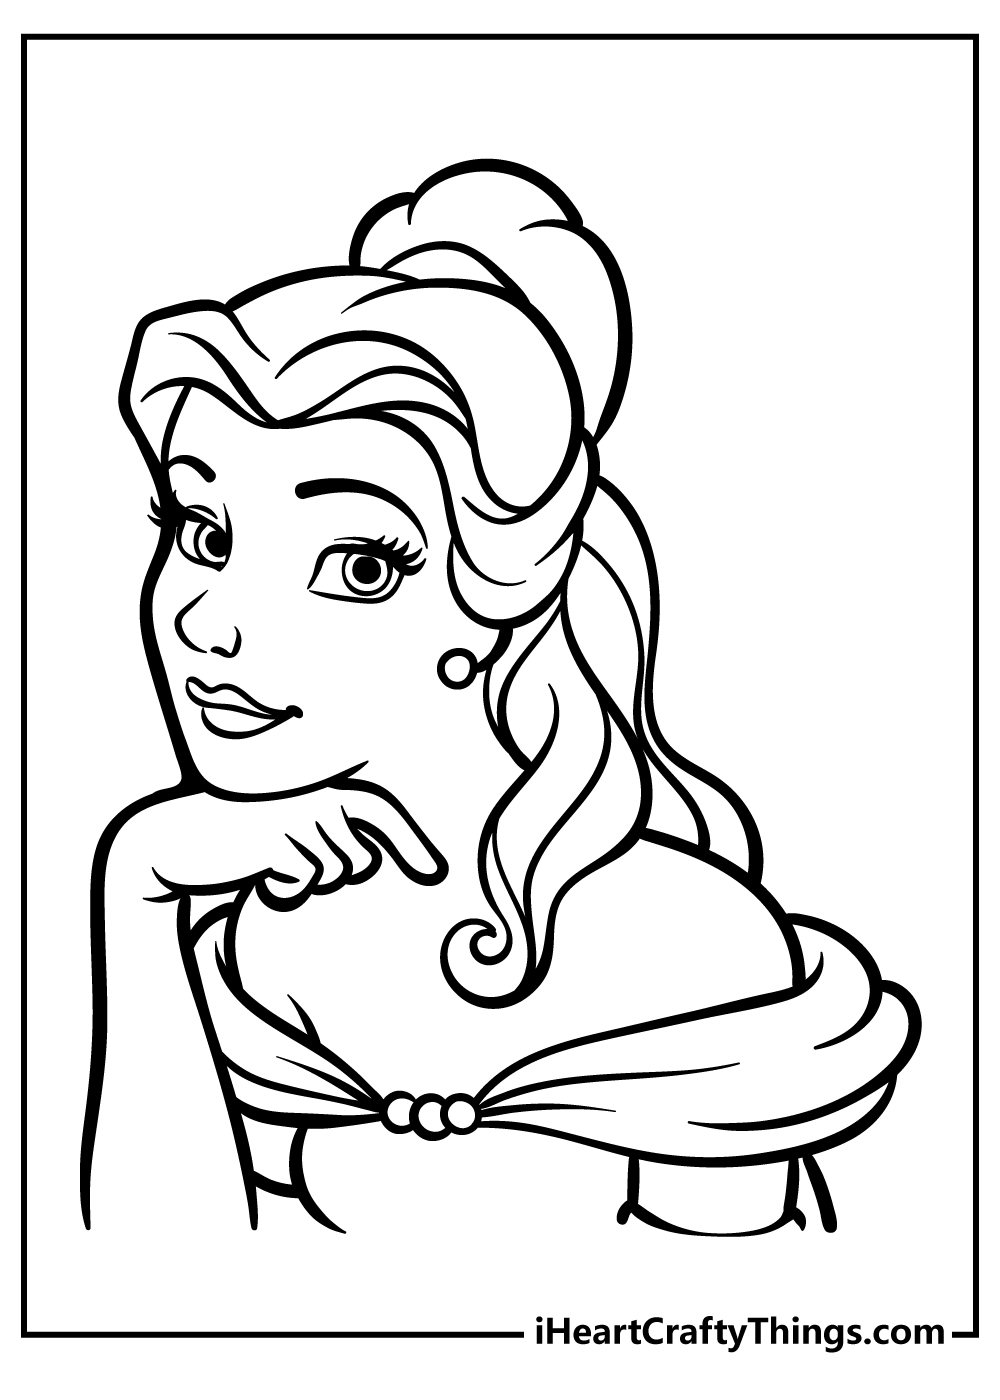 Belle Coloring Pages for kids free download